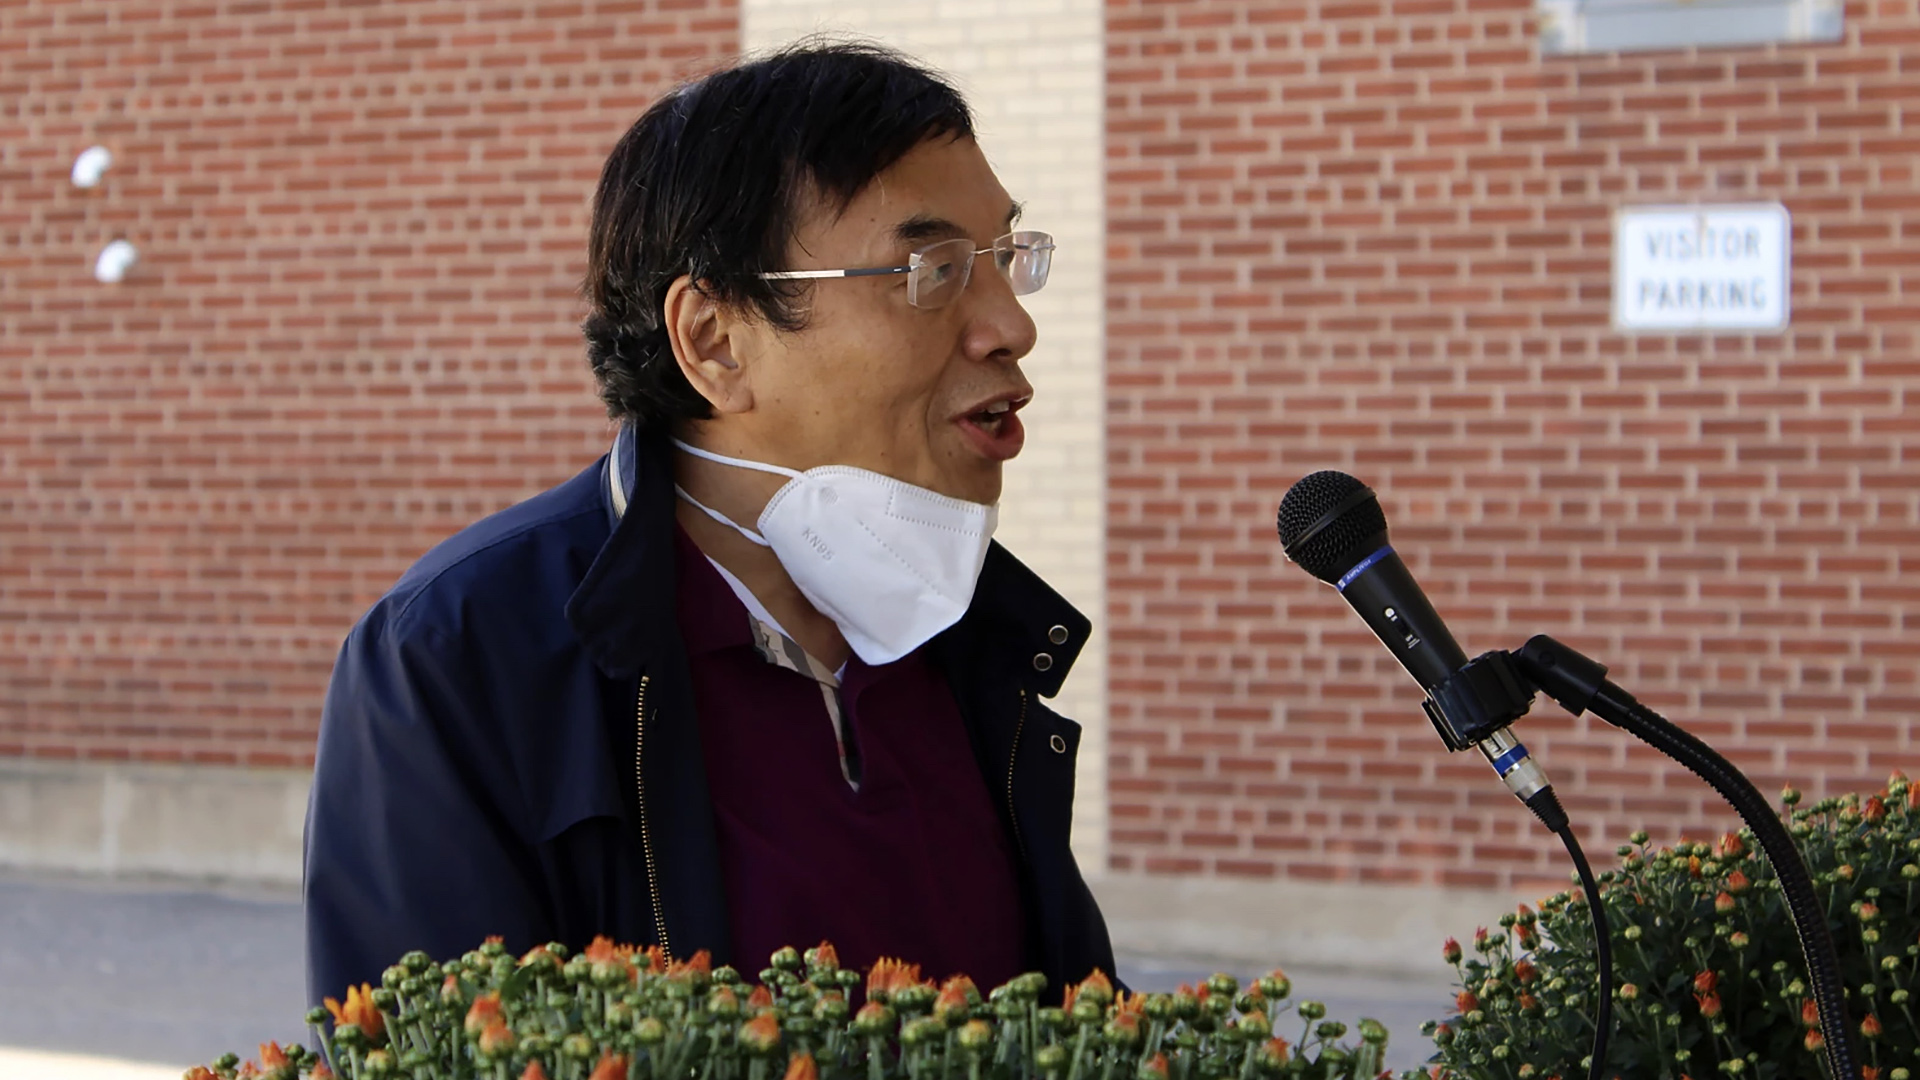 Yong Liu sits outdoors behind two bunches of flowers and speaks into a microphone, with a brick wall and a sign reading "Visitor Parking" in the background.